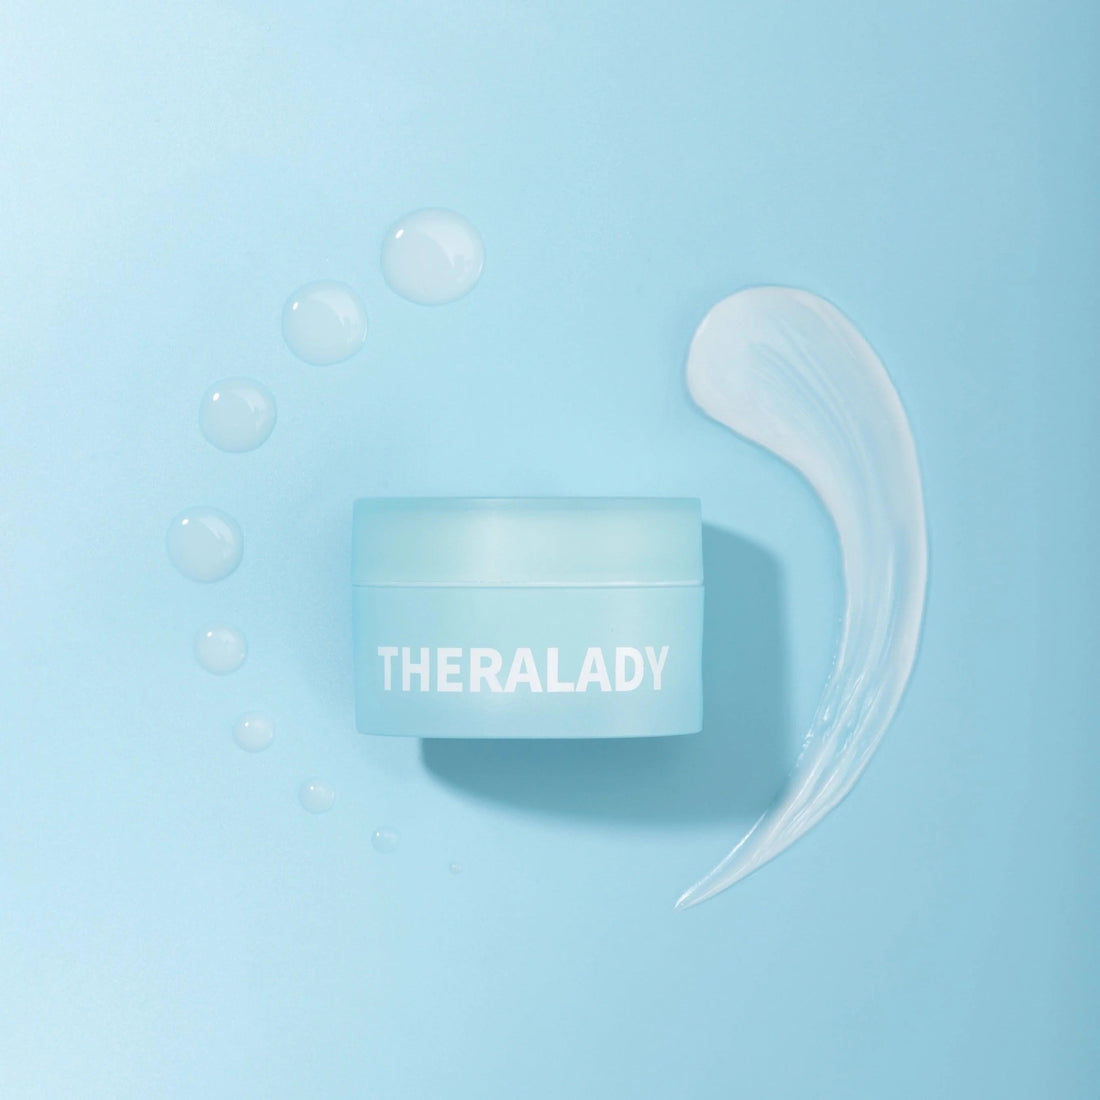 Theralady Sea Grapes Hydrating Cream - EZZ OFFICIAL